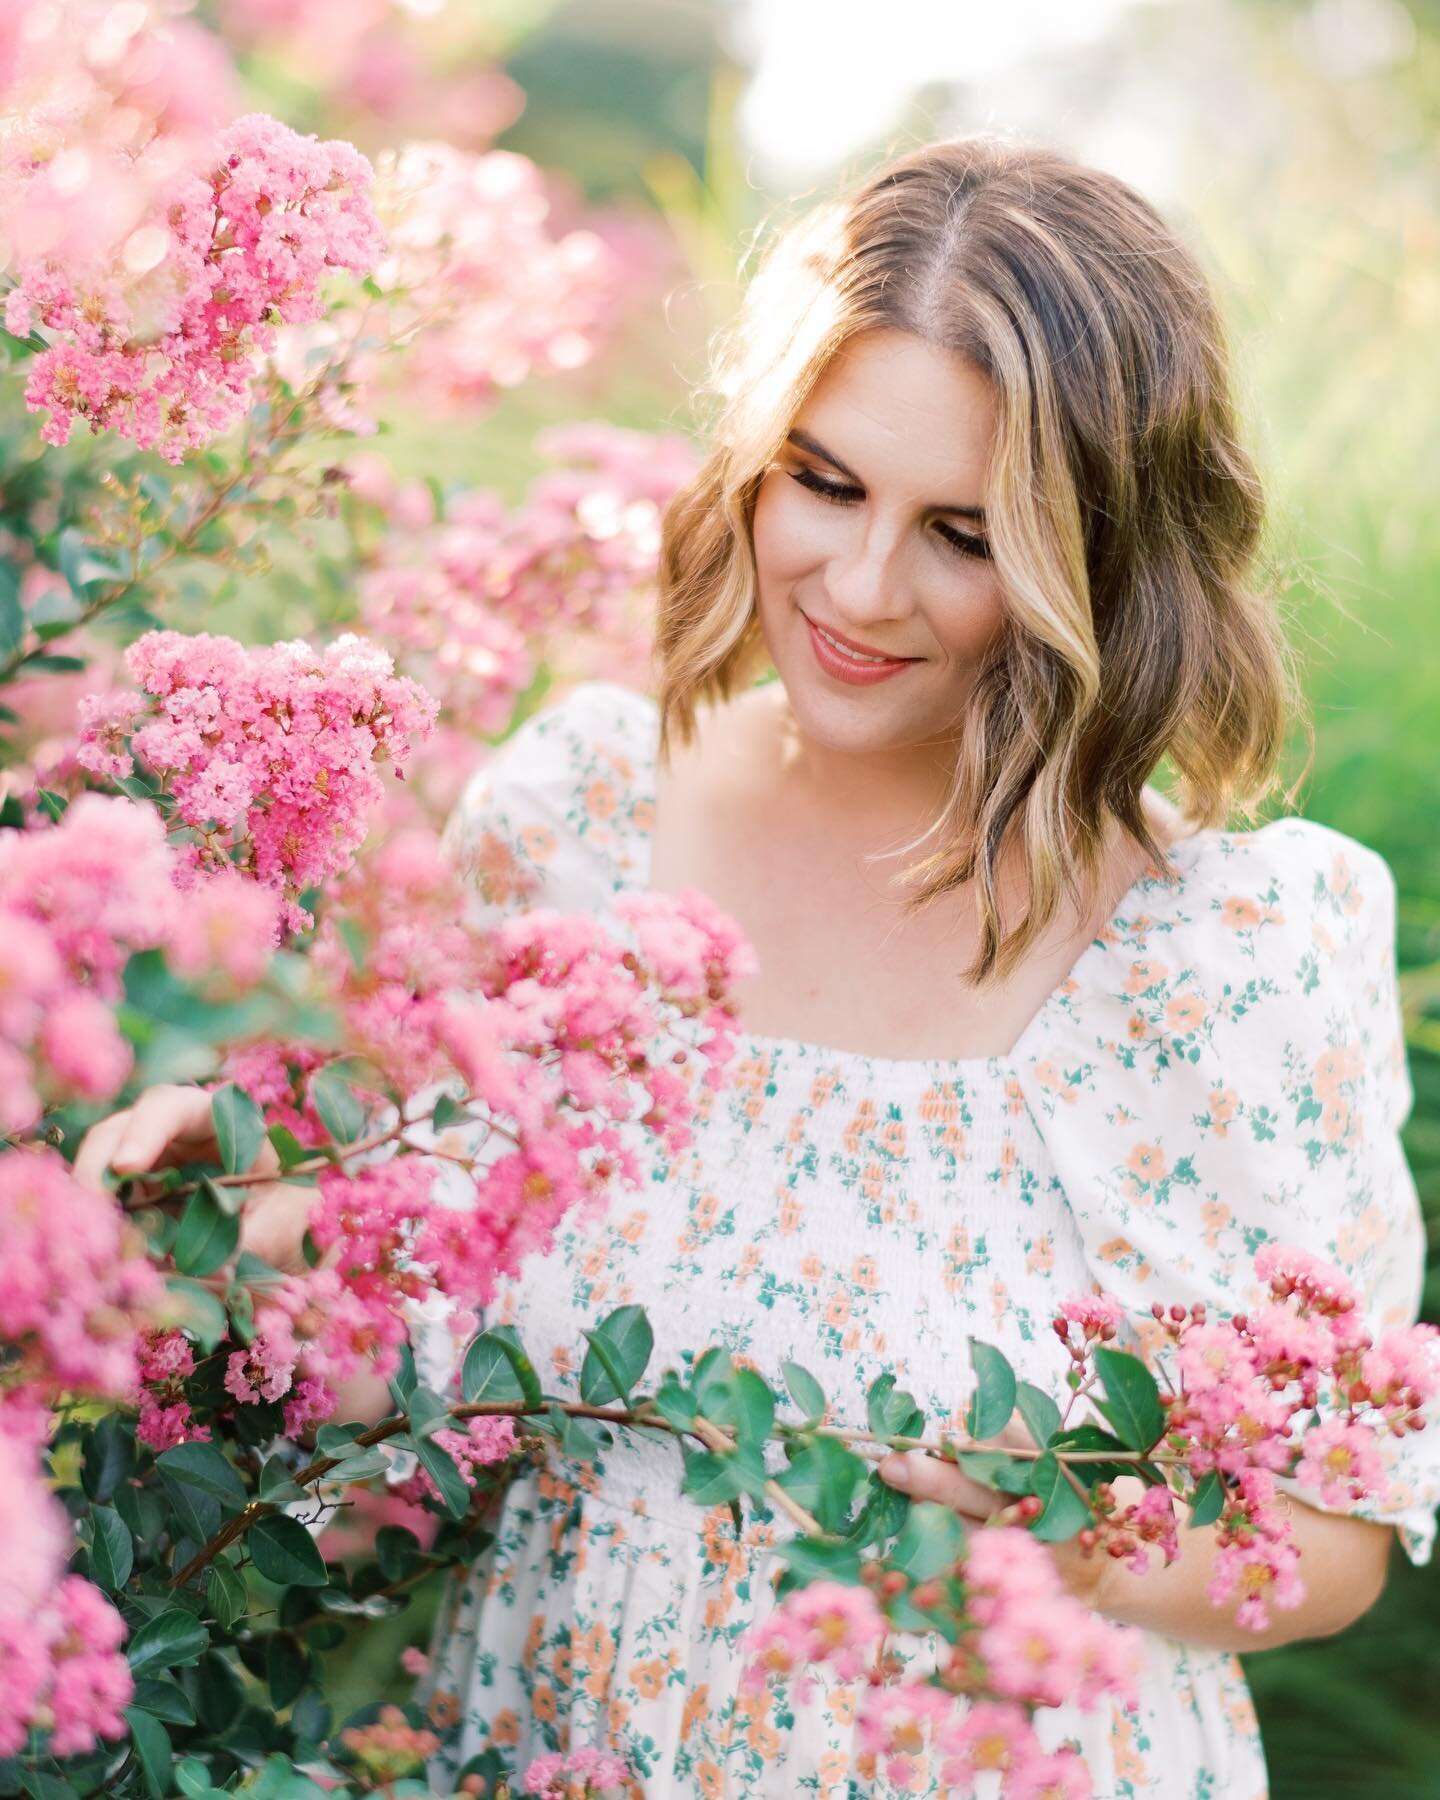 The season of blooms is nearly here, and in my opinion, it&rsquo;s one of the dreamiest times to take photos. Spring Mini Session sign-ups were made available to my email list this week - they will soon available to all. These are a fantastic opportu